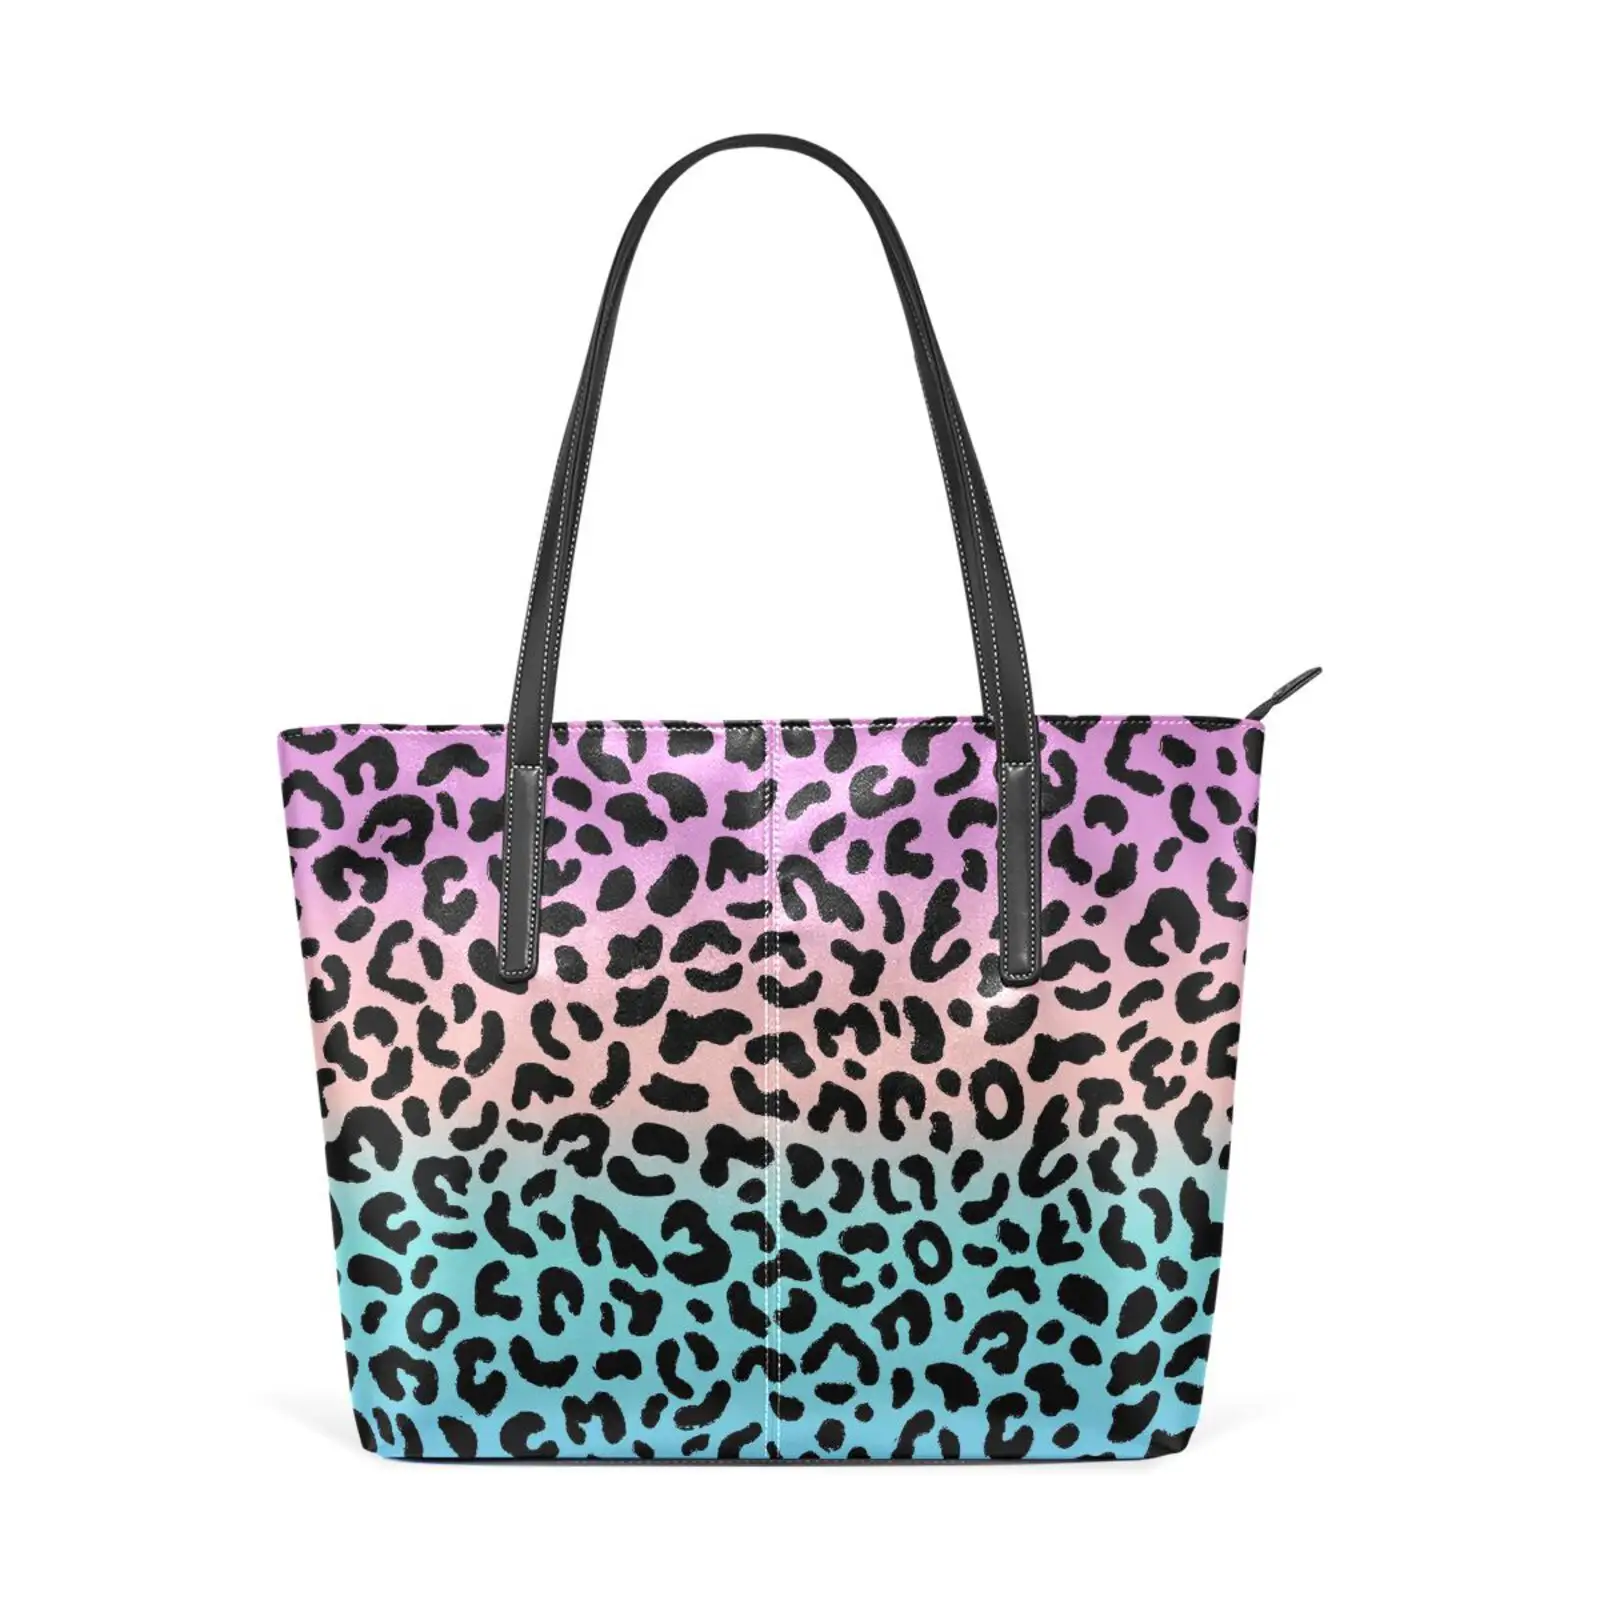 New Arrival Custom Pink Leopard Print Tote Bags High Quality Pu leather Tote Hand Bags Women